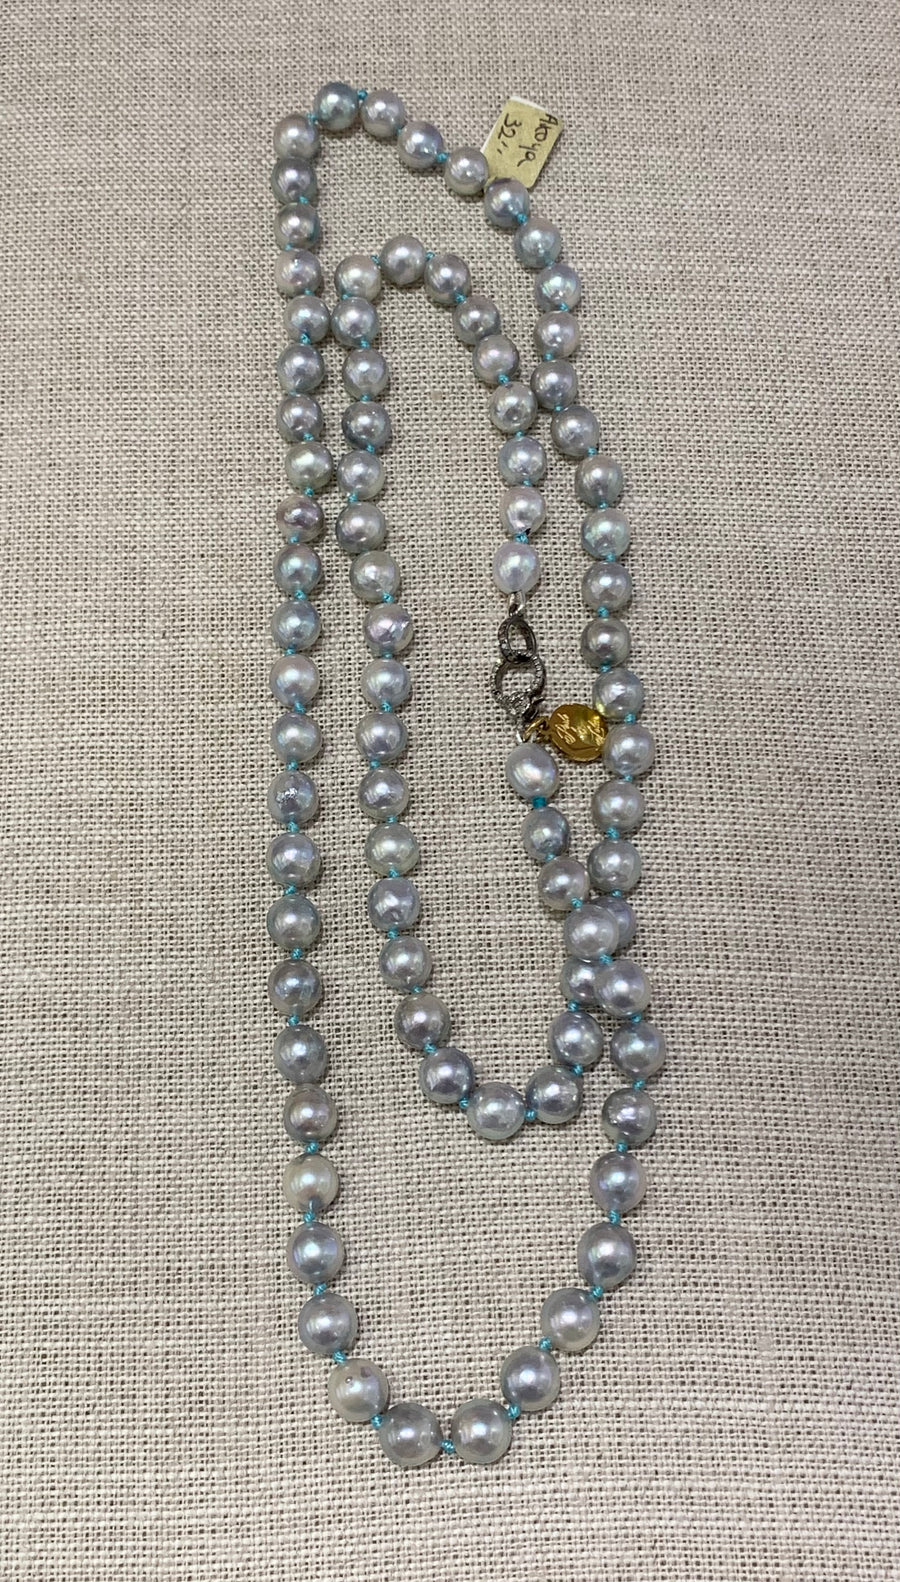 Necklace | Akoya Pearls, Silver Toned | 32